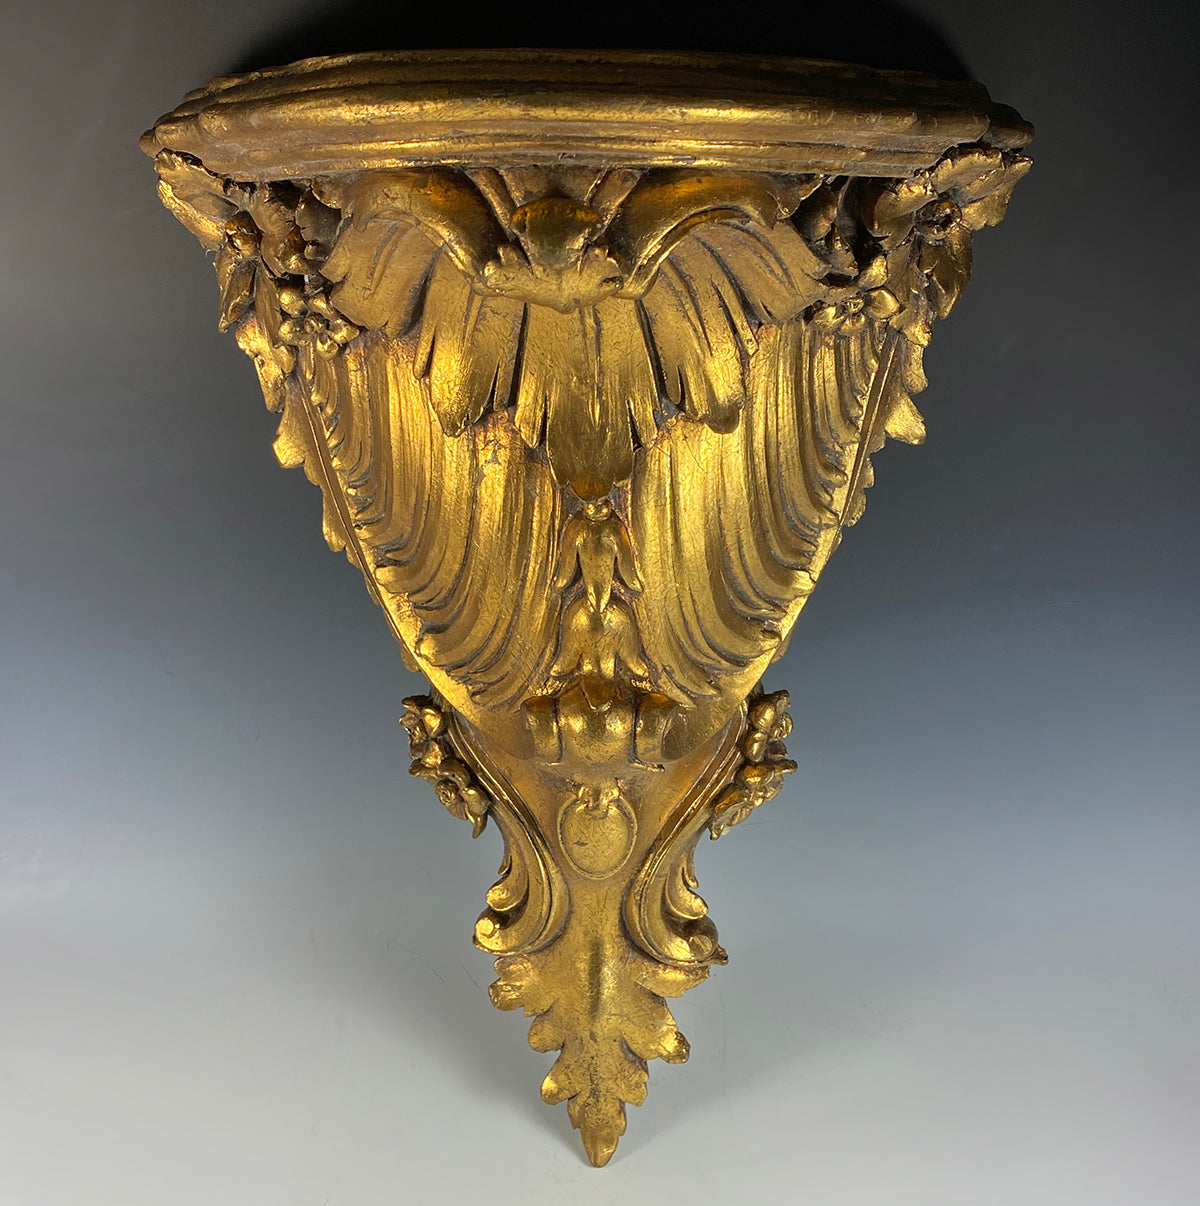 Fabulous 19th c. French or Italian Carved Wood Gilded 17" Bracket or Clock Shelf